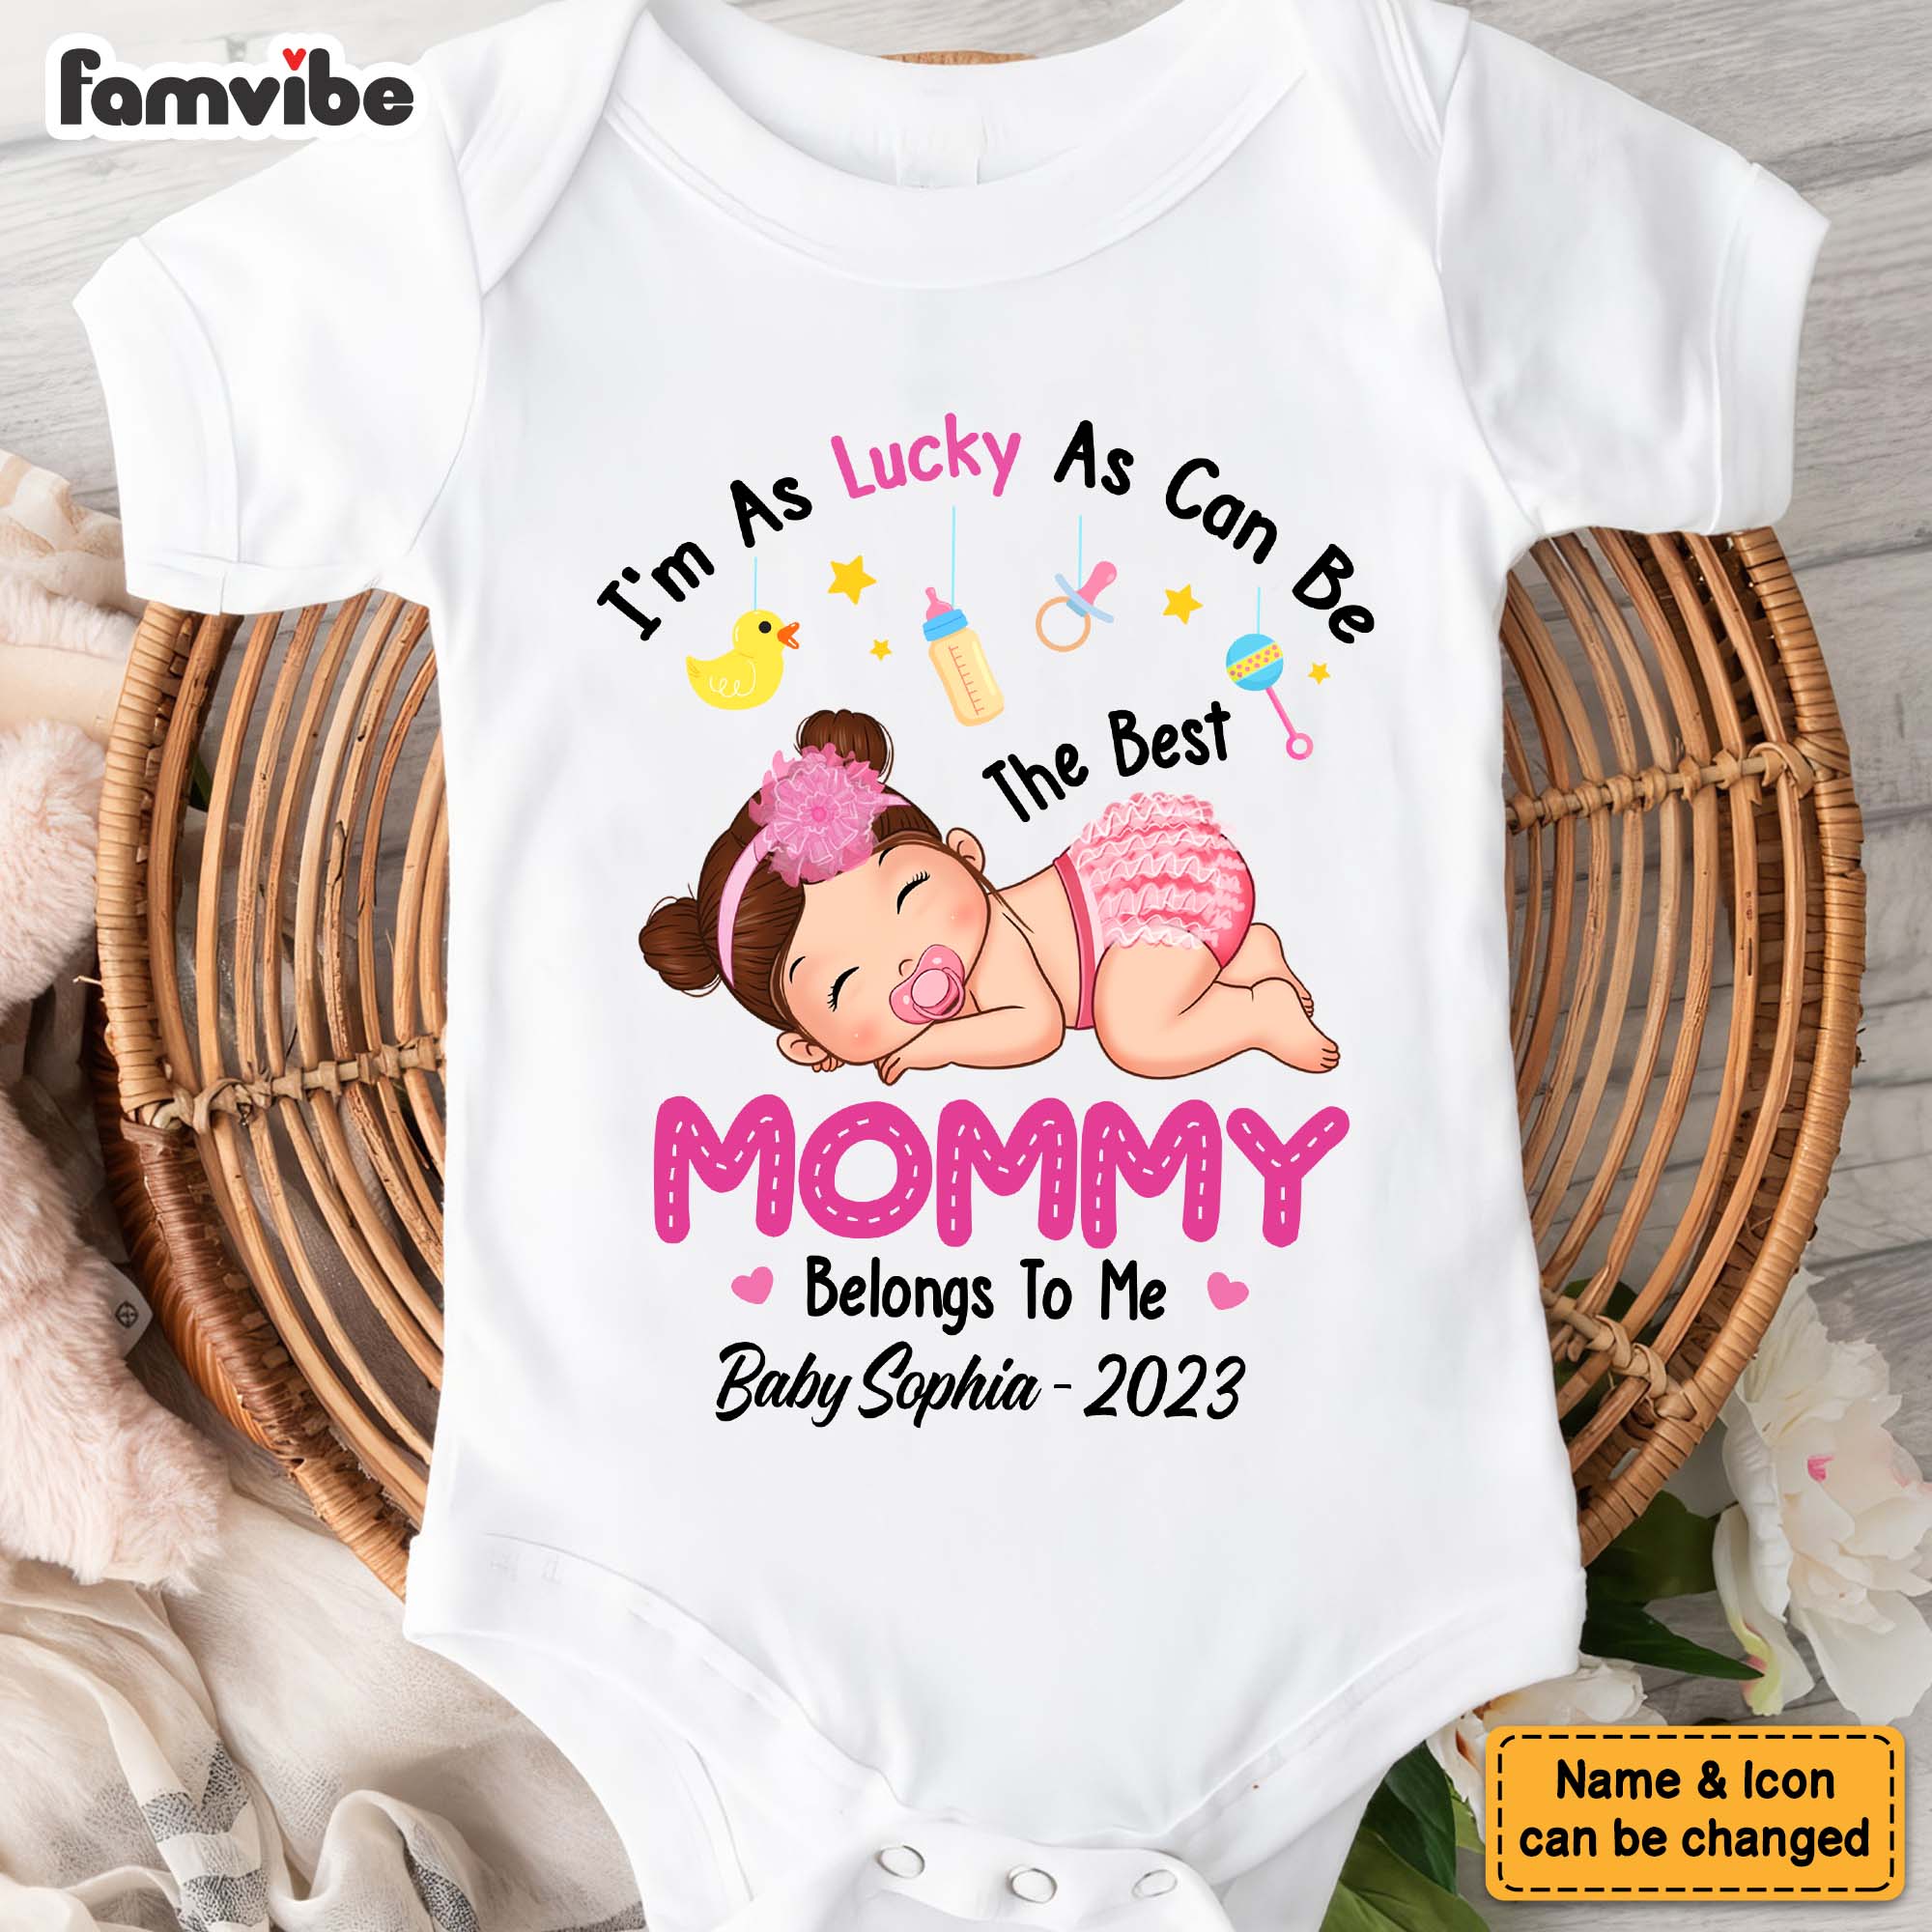 Personalized Gift For Newborn Baby I'm As Lucky As Can Be Baby Onesie 27342 Primary Mockup